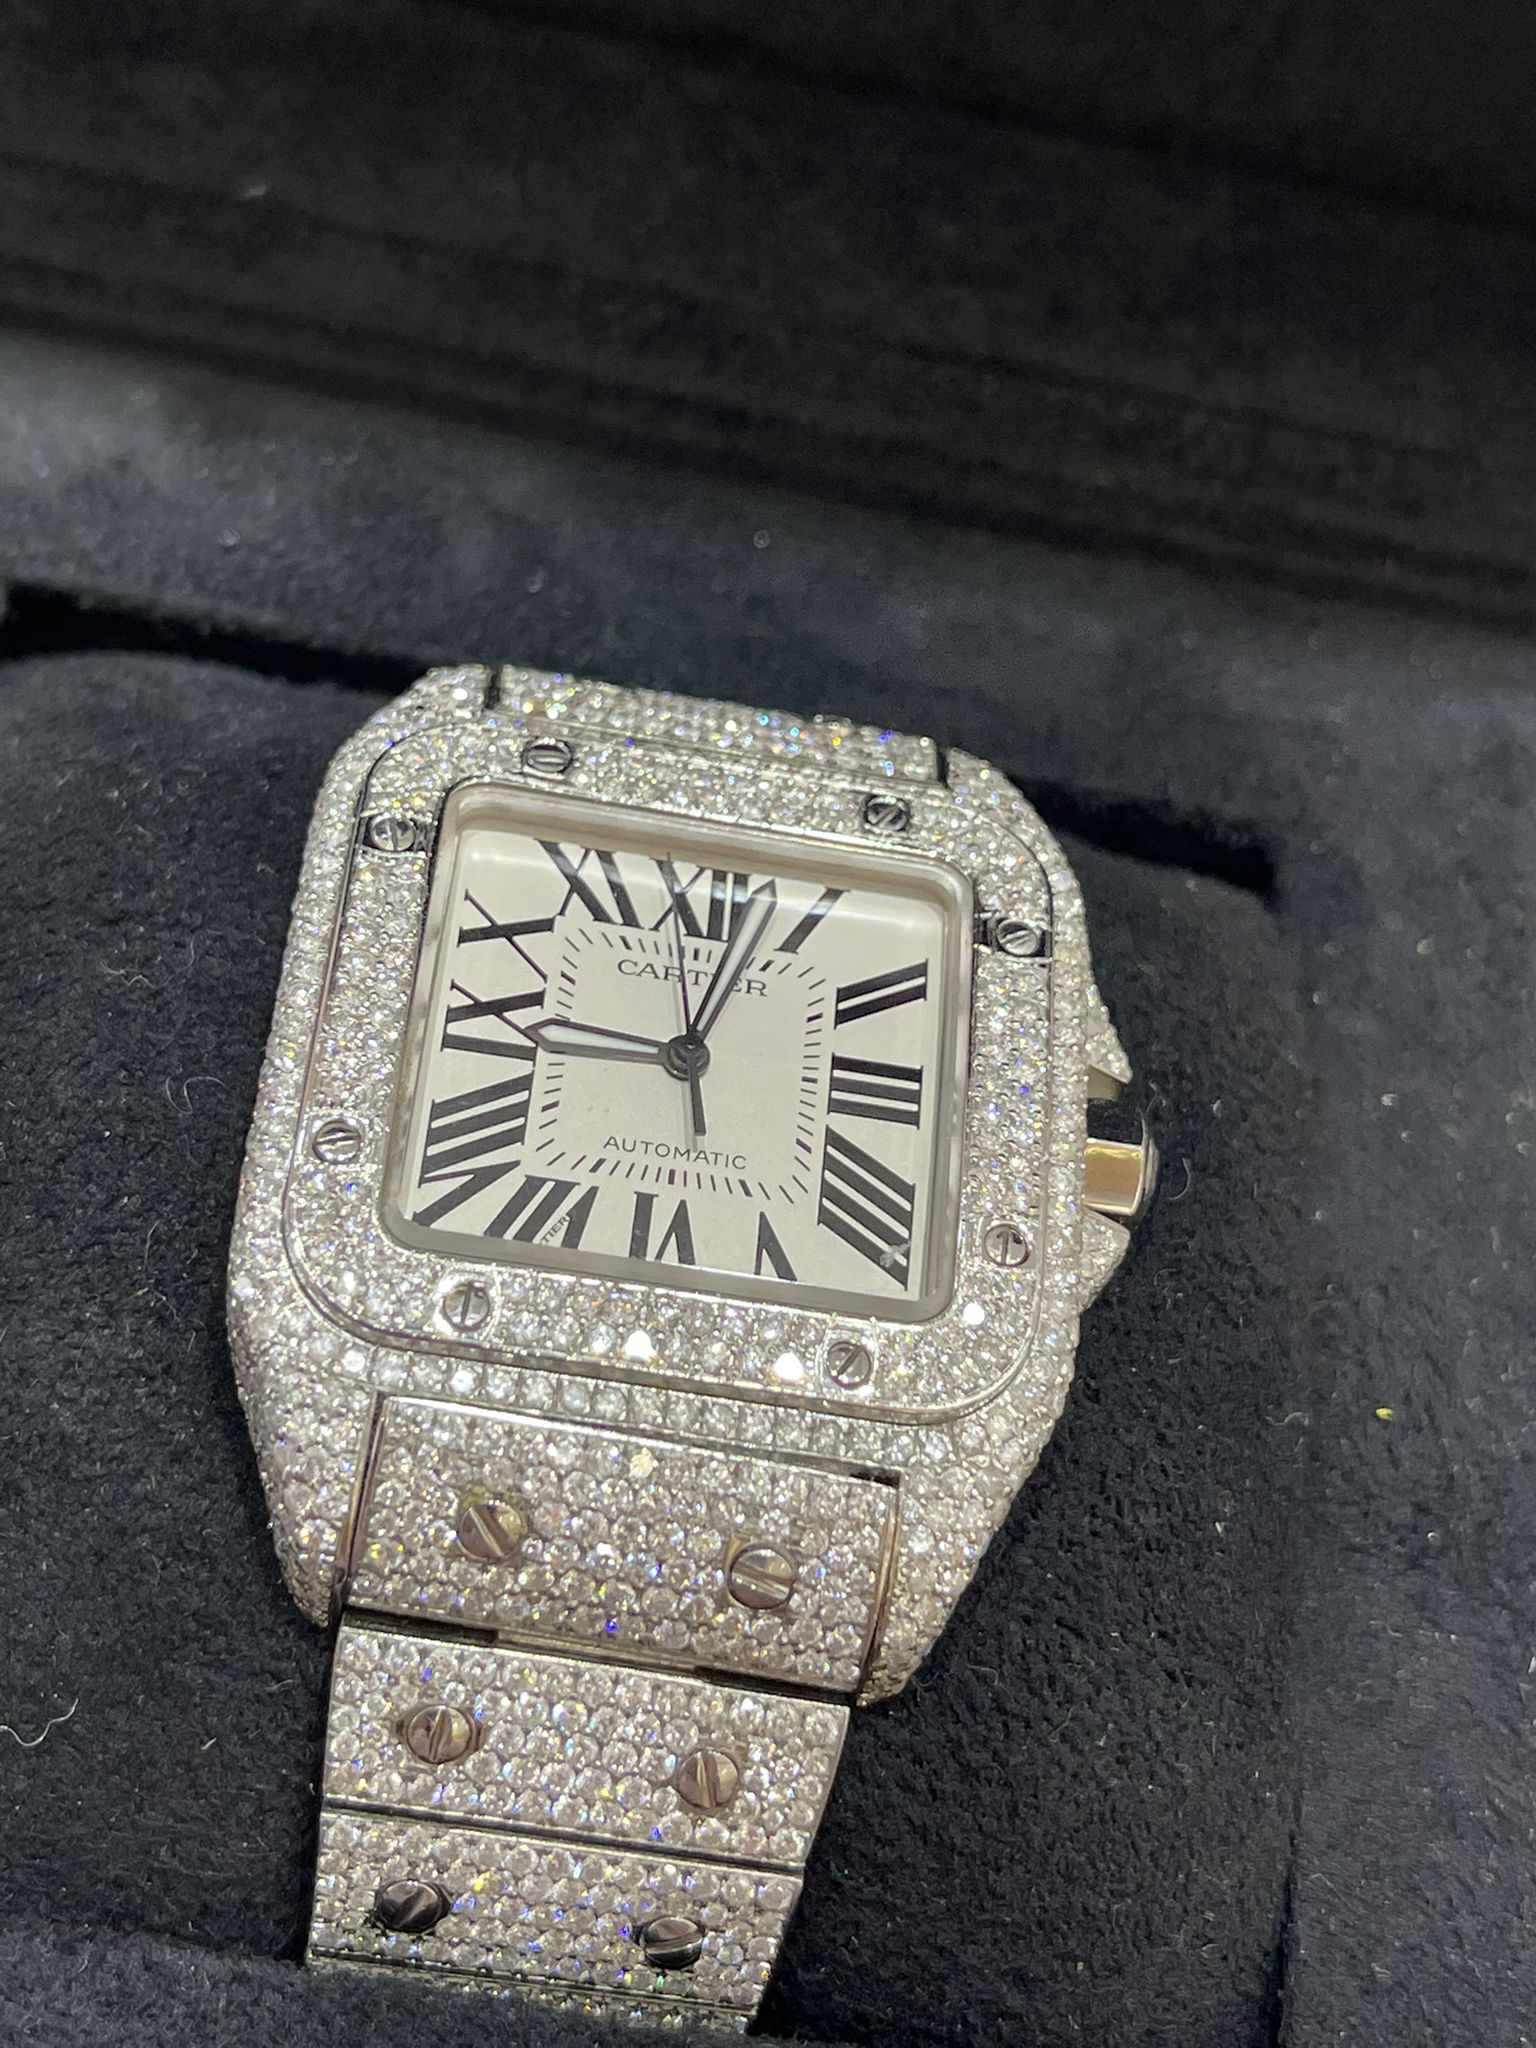 41mm cartier santos xl bust down watch (xtra thick model) 24+ cts .t.w vs1